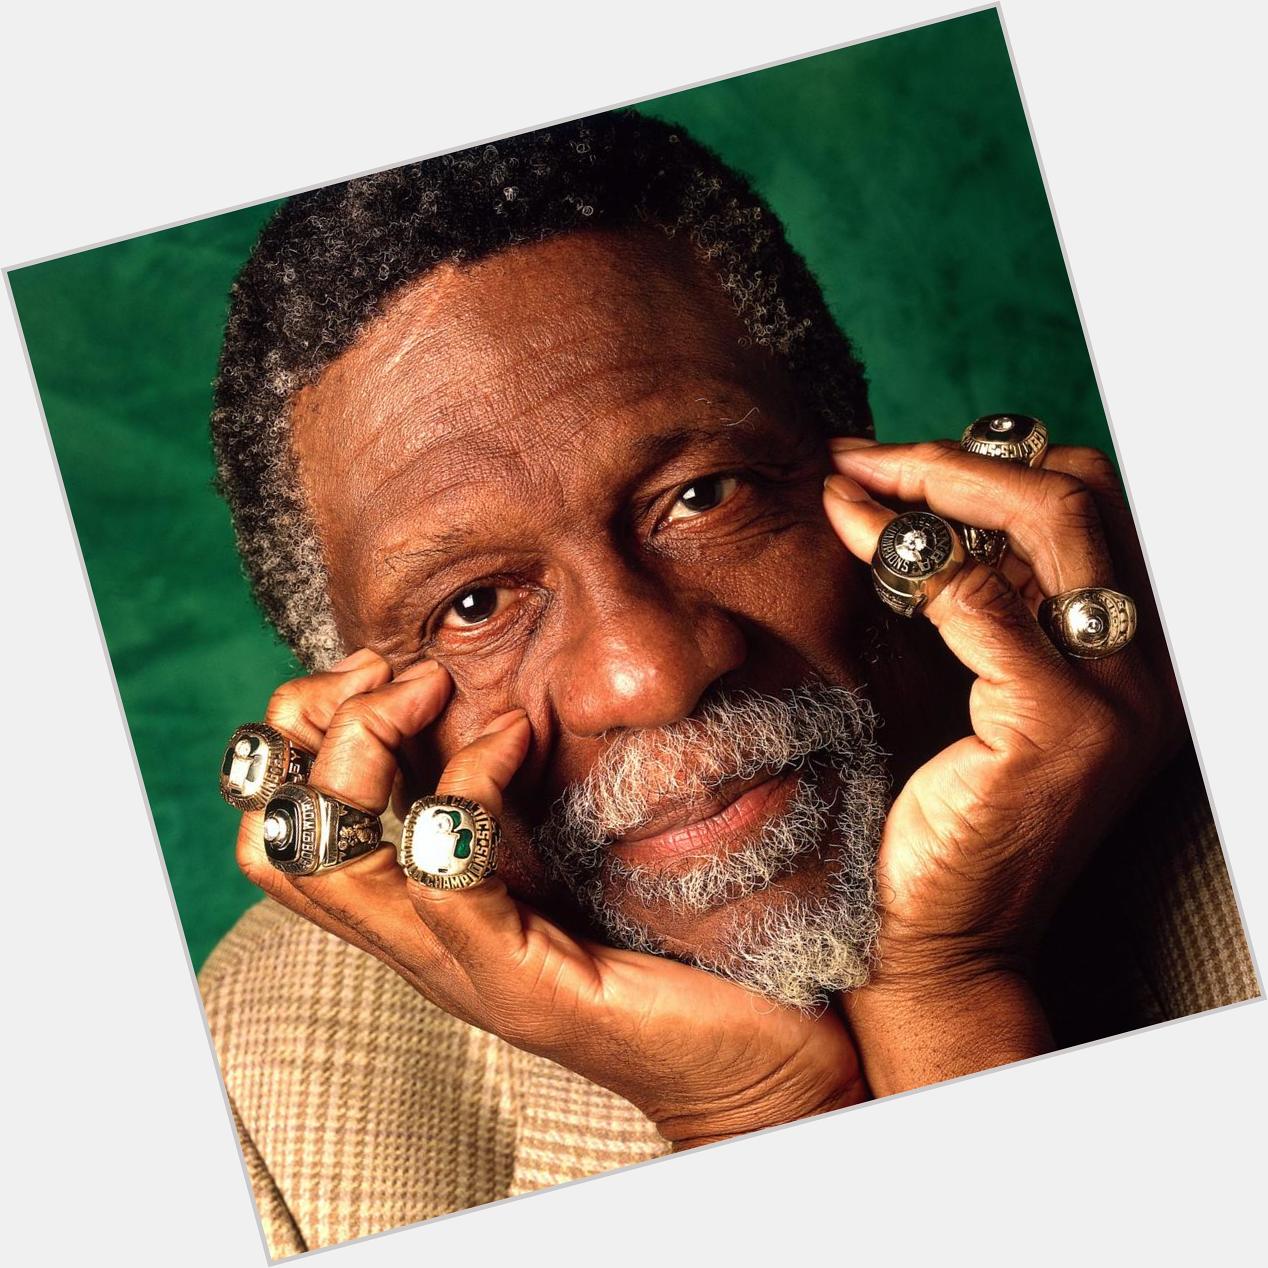 Happy 81st birthday to the winningest NBA player of all-time, 11-time World Champion, legend Bill Russell 